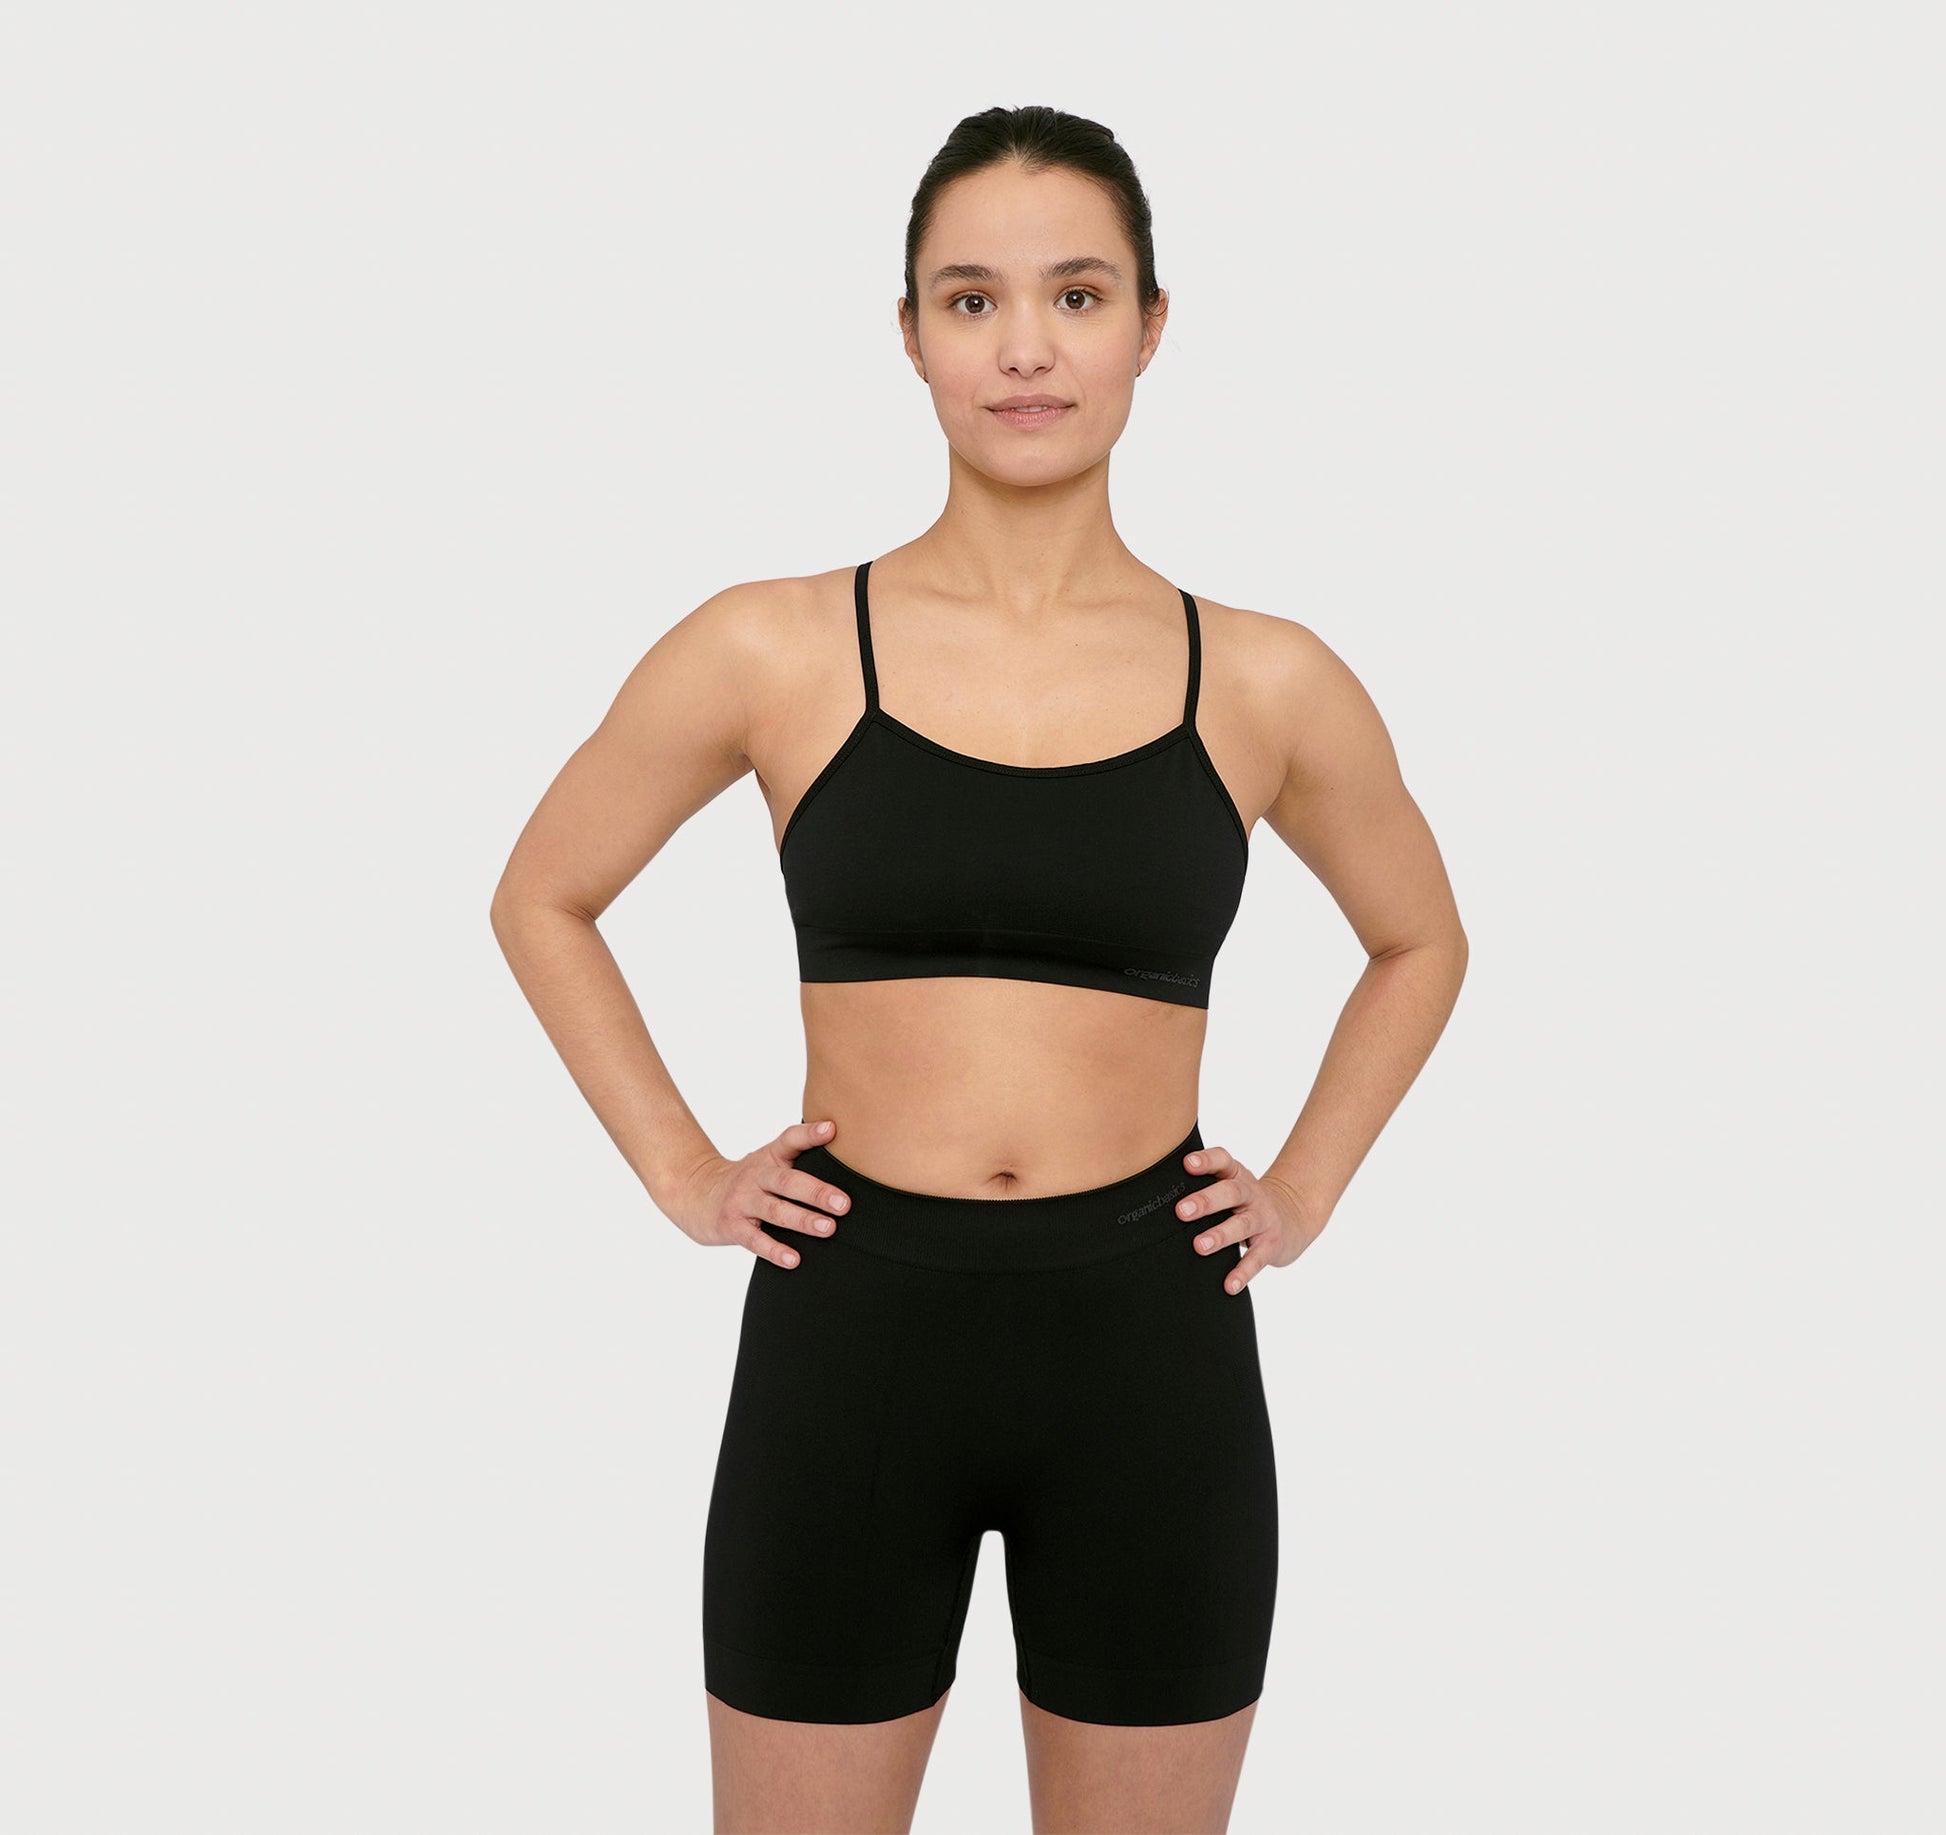 Buy Active Sports Bra 3-pack | Fast Delivery | Organic Basics US